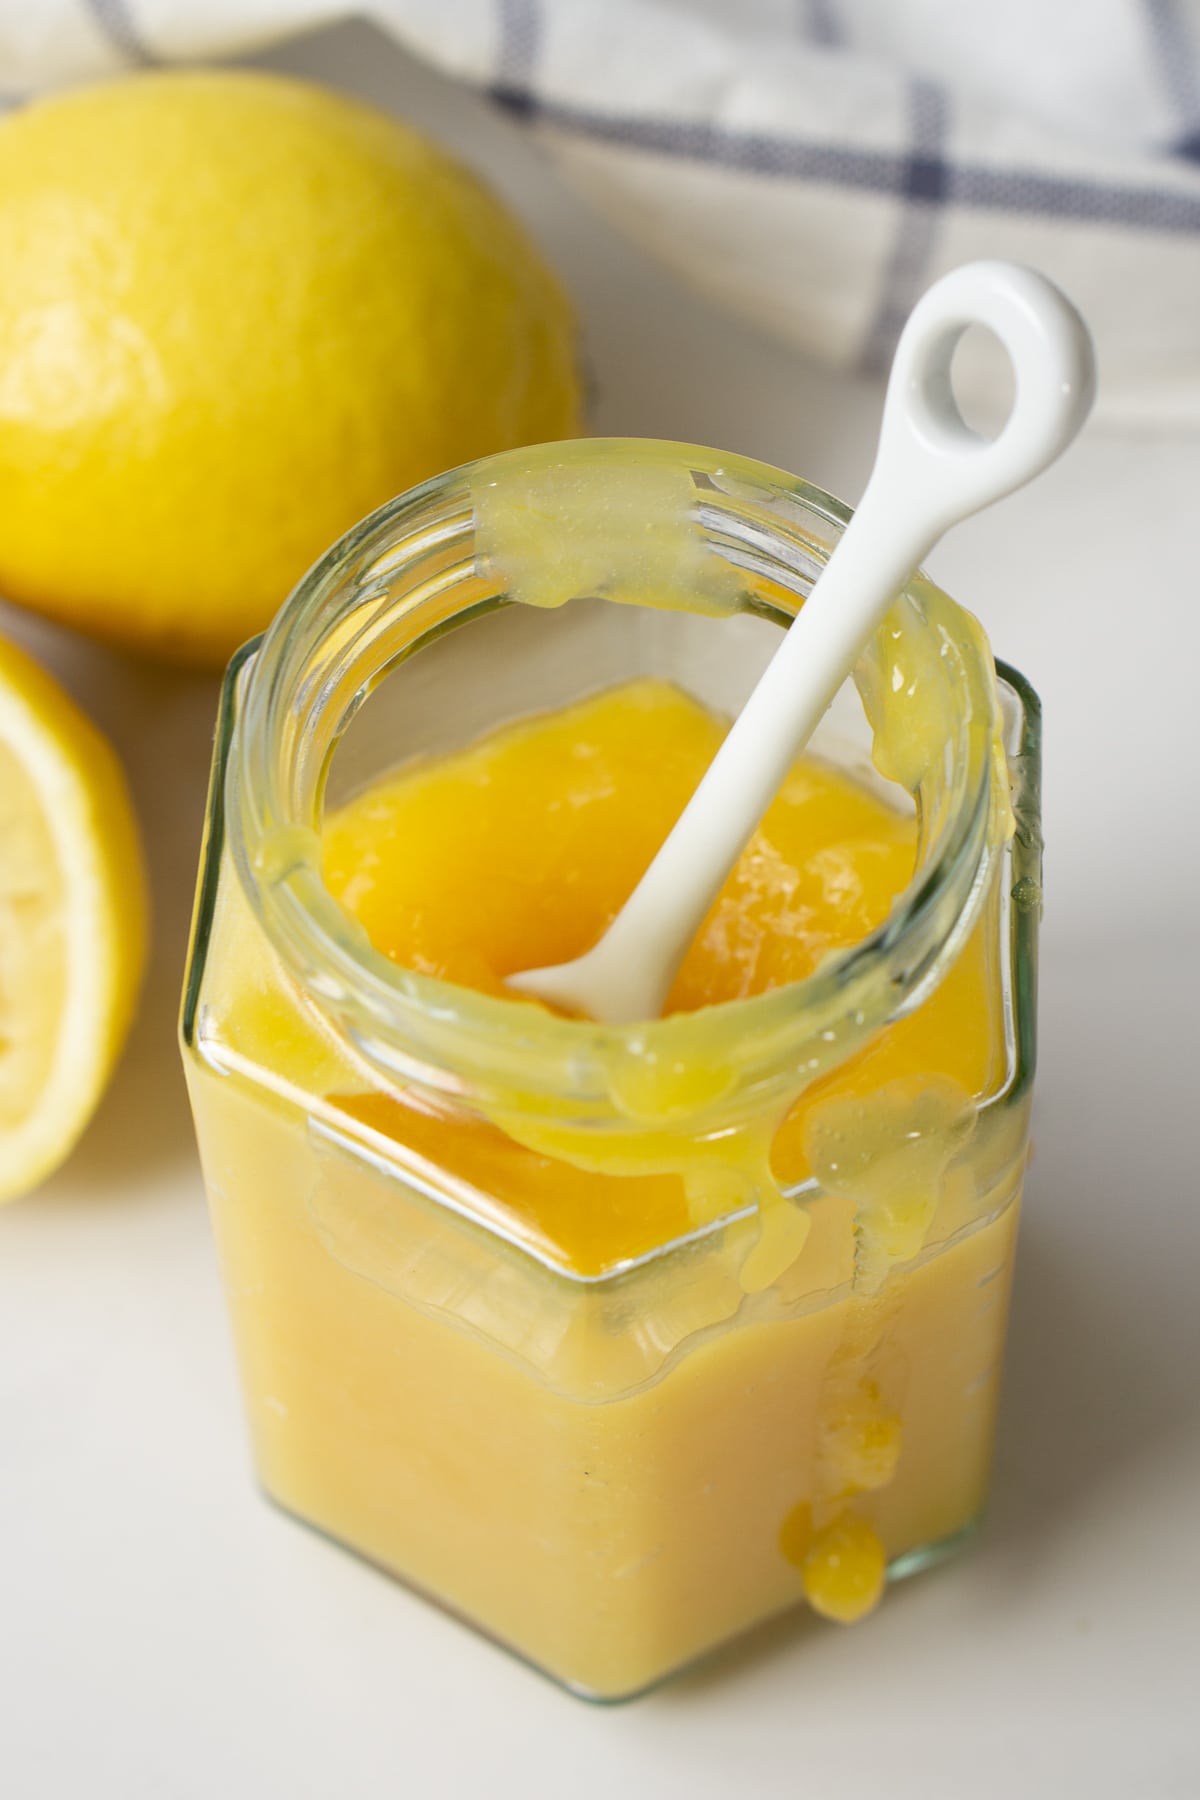 Lemon butter in a jar with a spoon